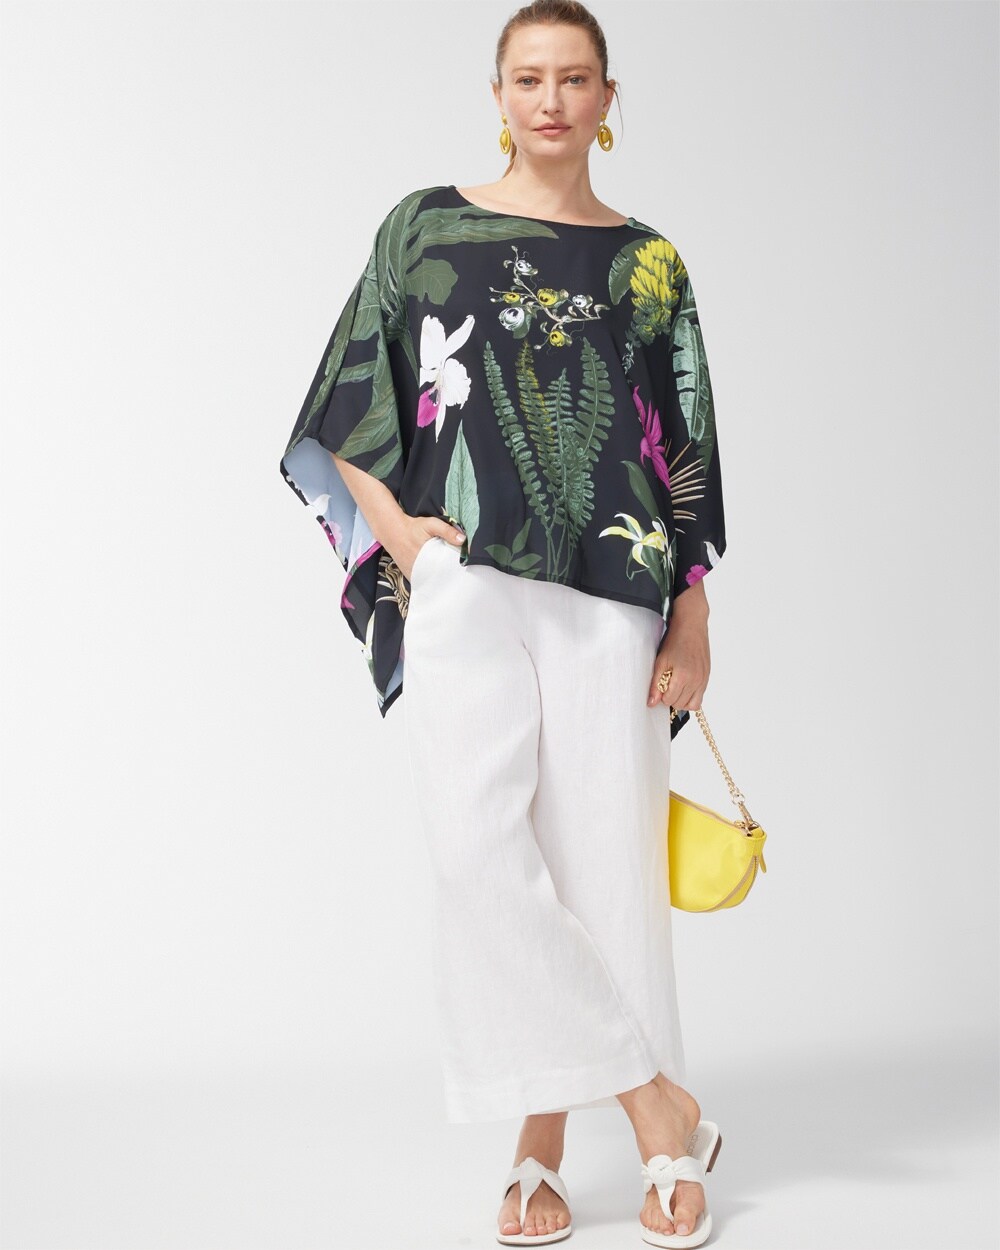 Tropical Print Poncho video preview image, click to start video